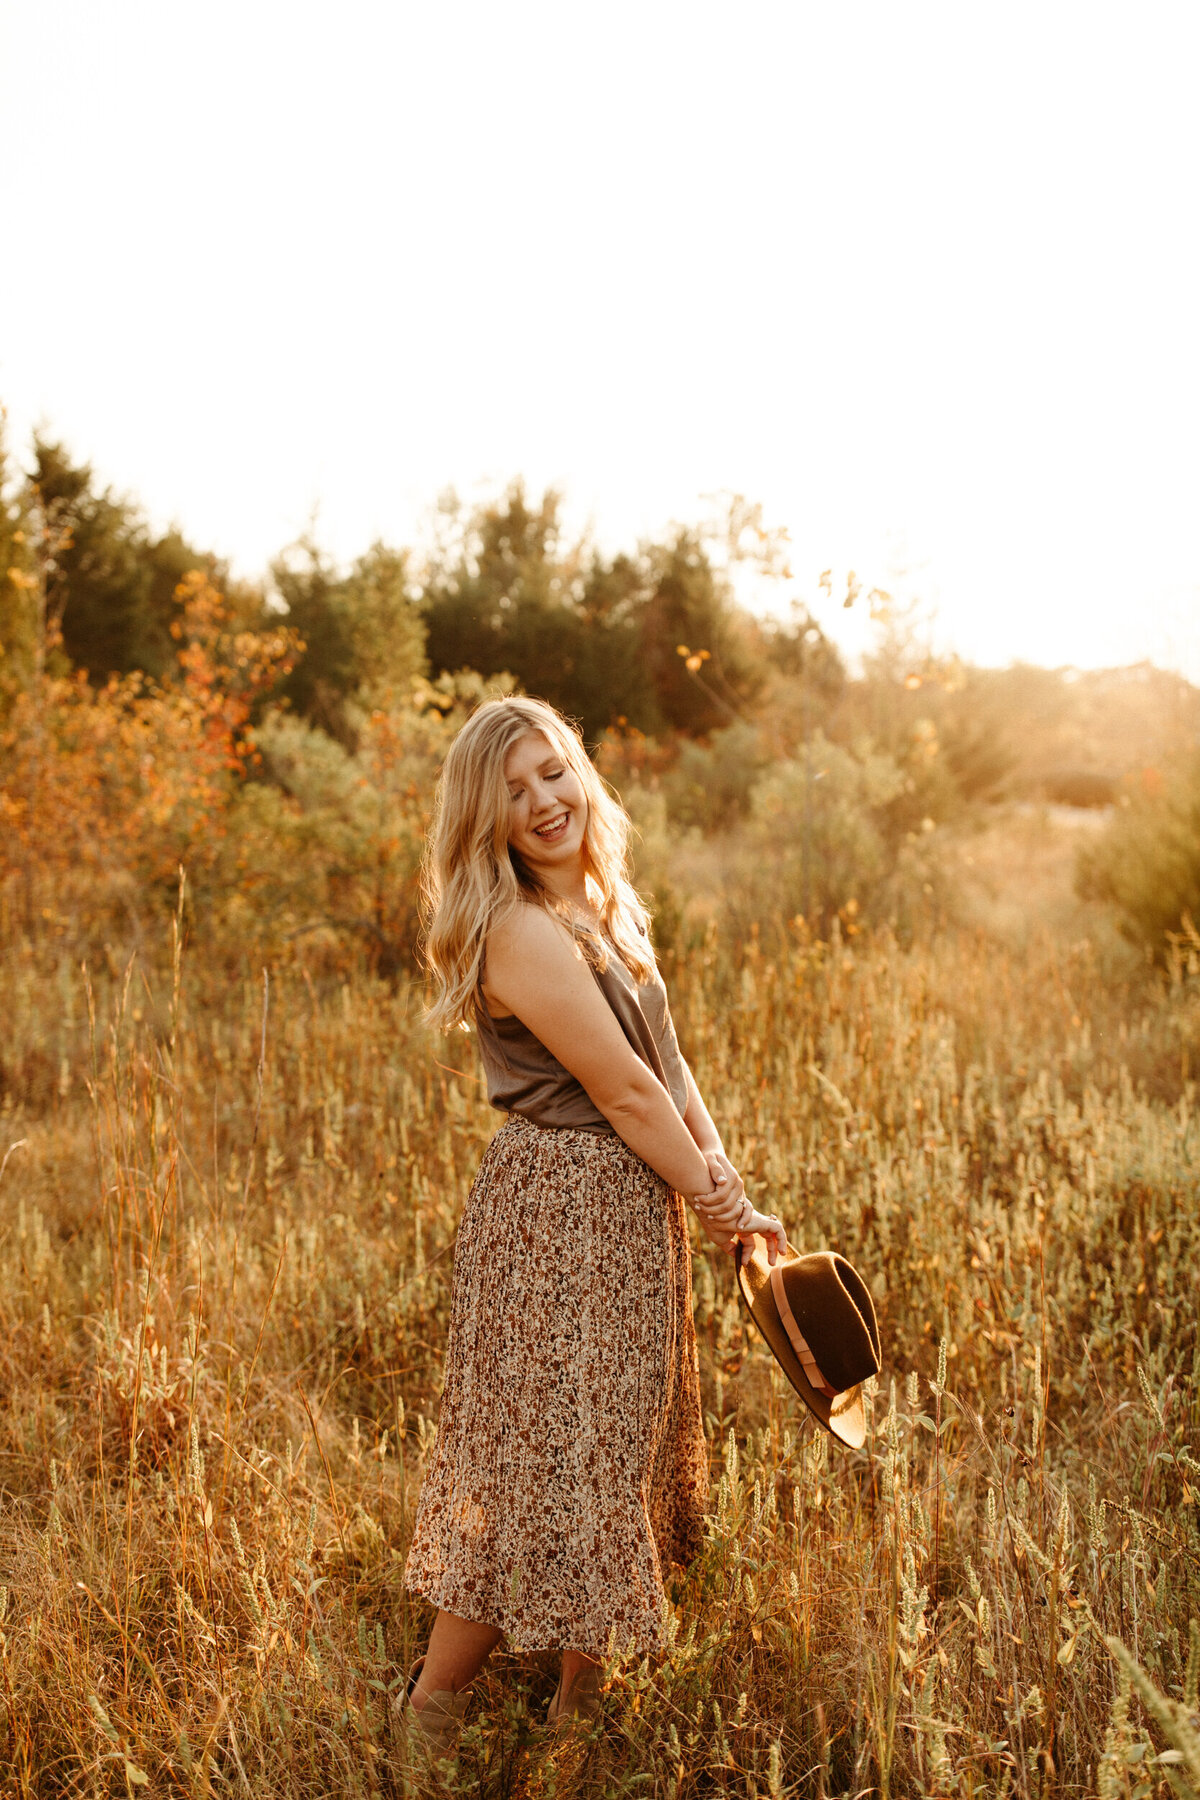 High school senior in brown shirt tucked into a long floral skirt twirling in a golden field at sunset